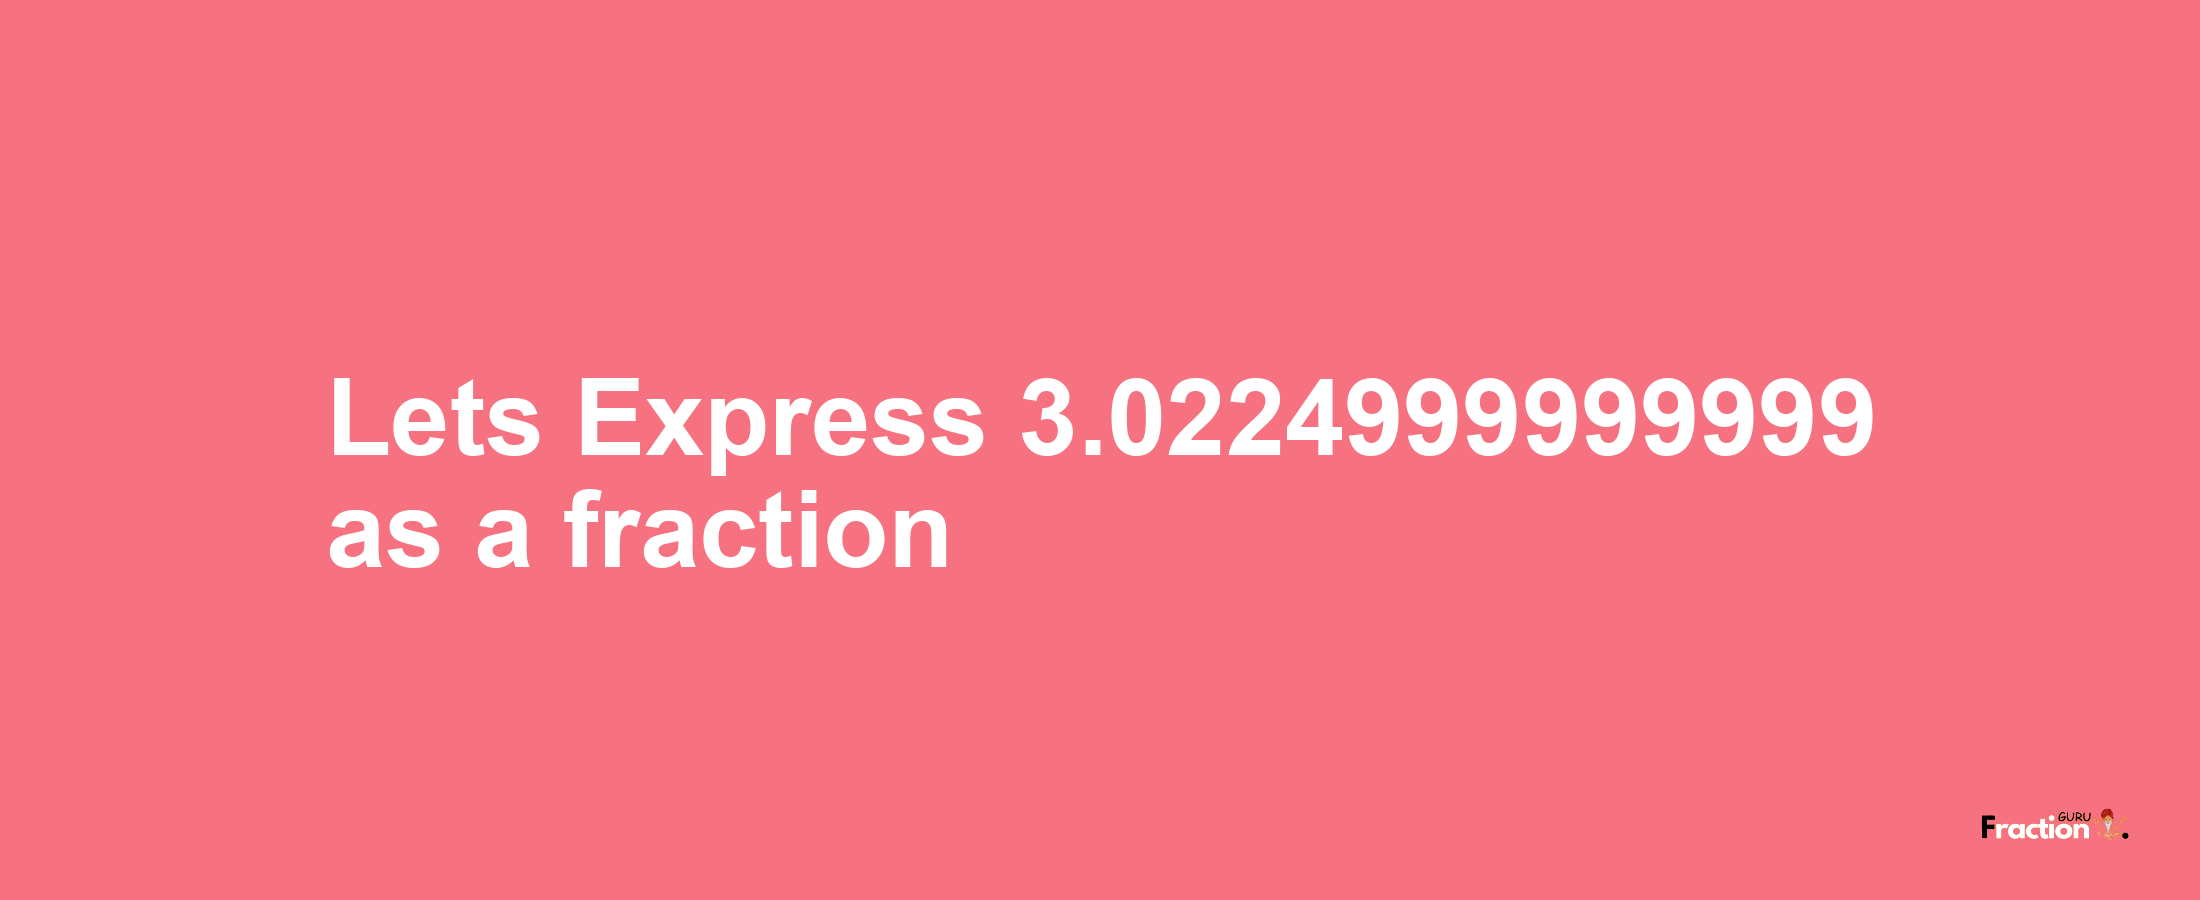 Lets Express 3.0224999999999 as afraction